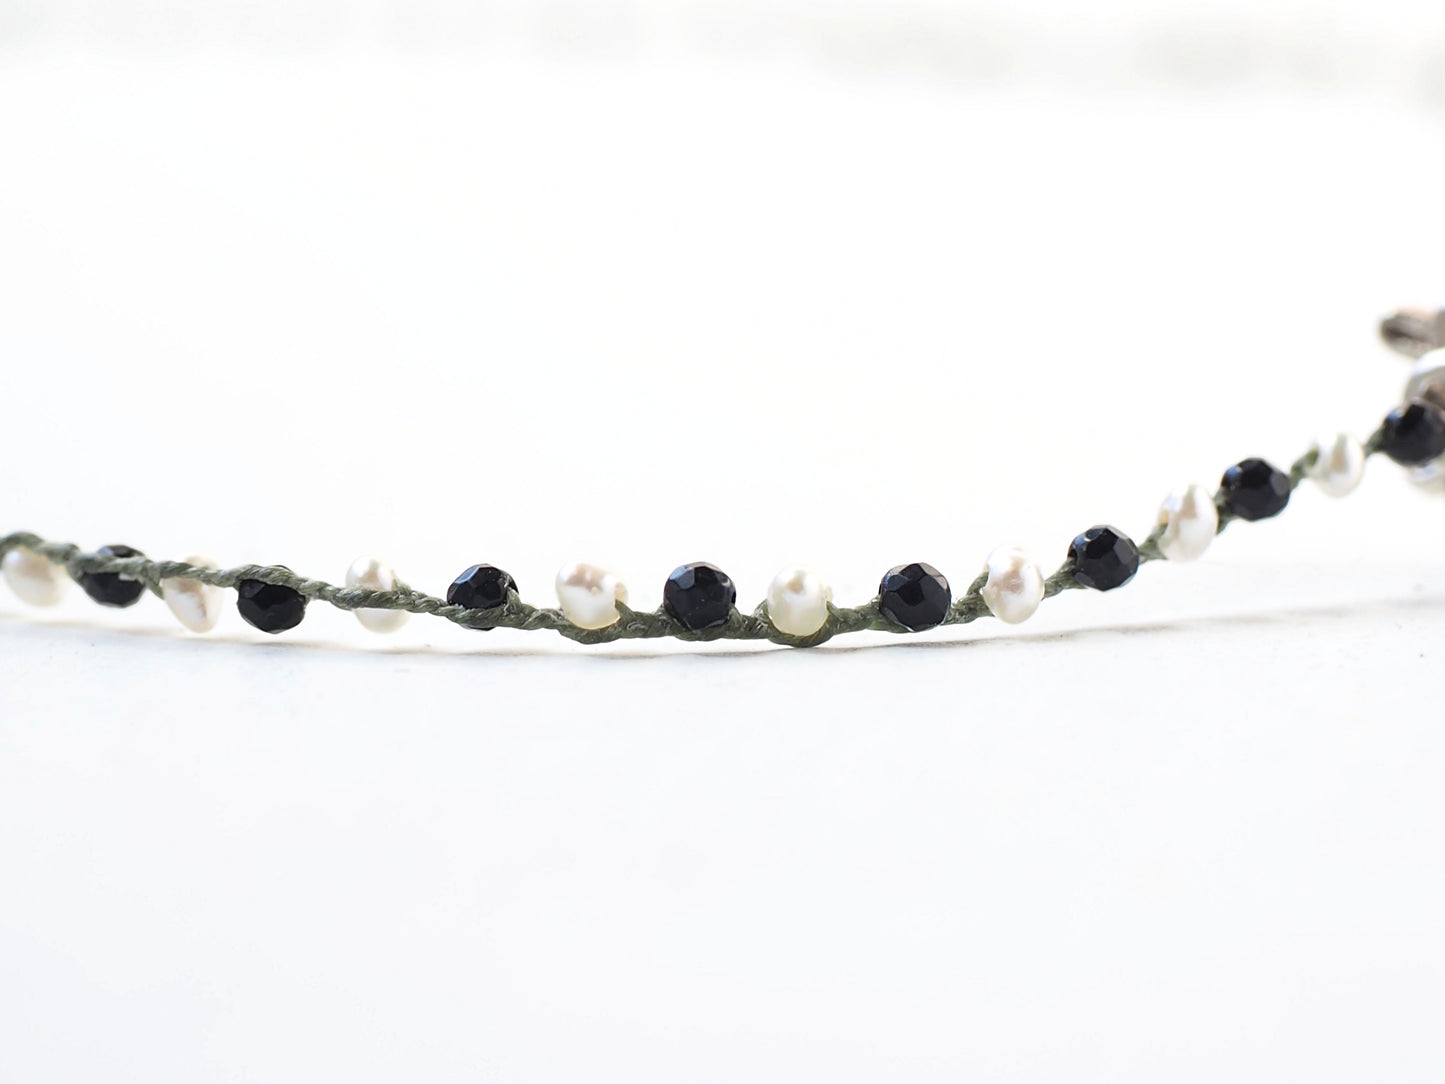 Freshwater Pearl Onyx "Black and White" Mantel Necklace 